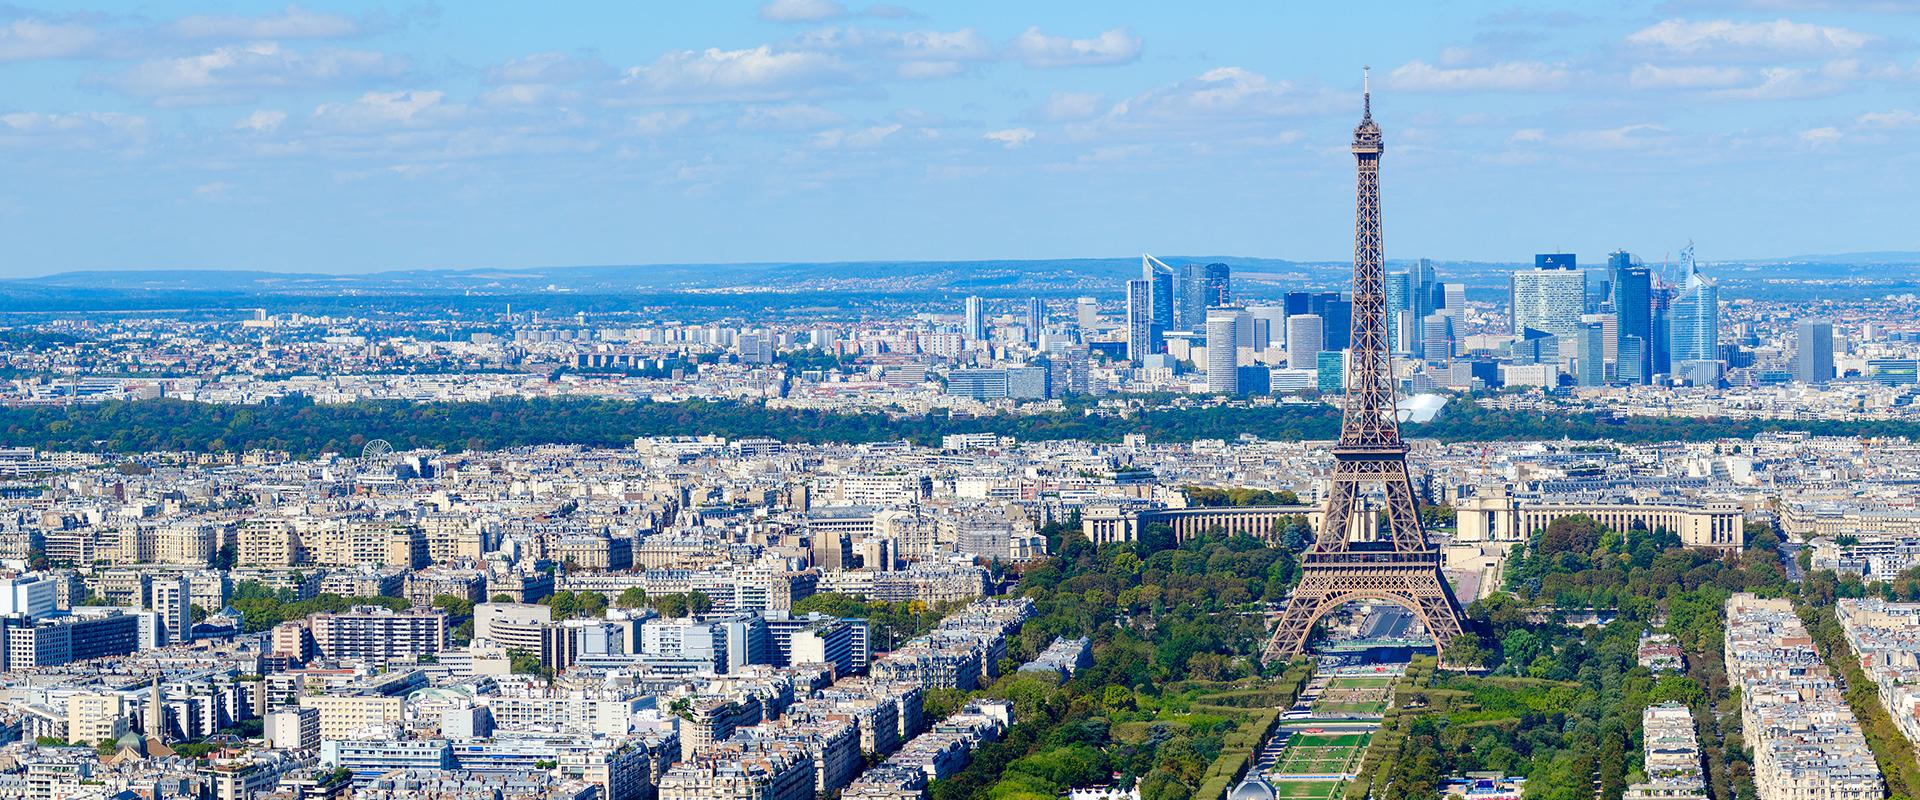 Paris from the sky.